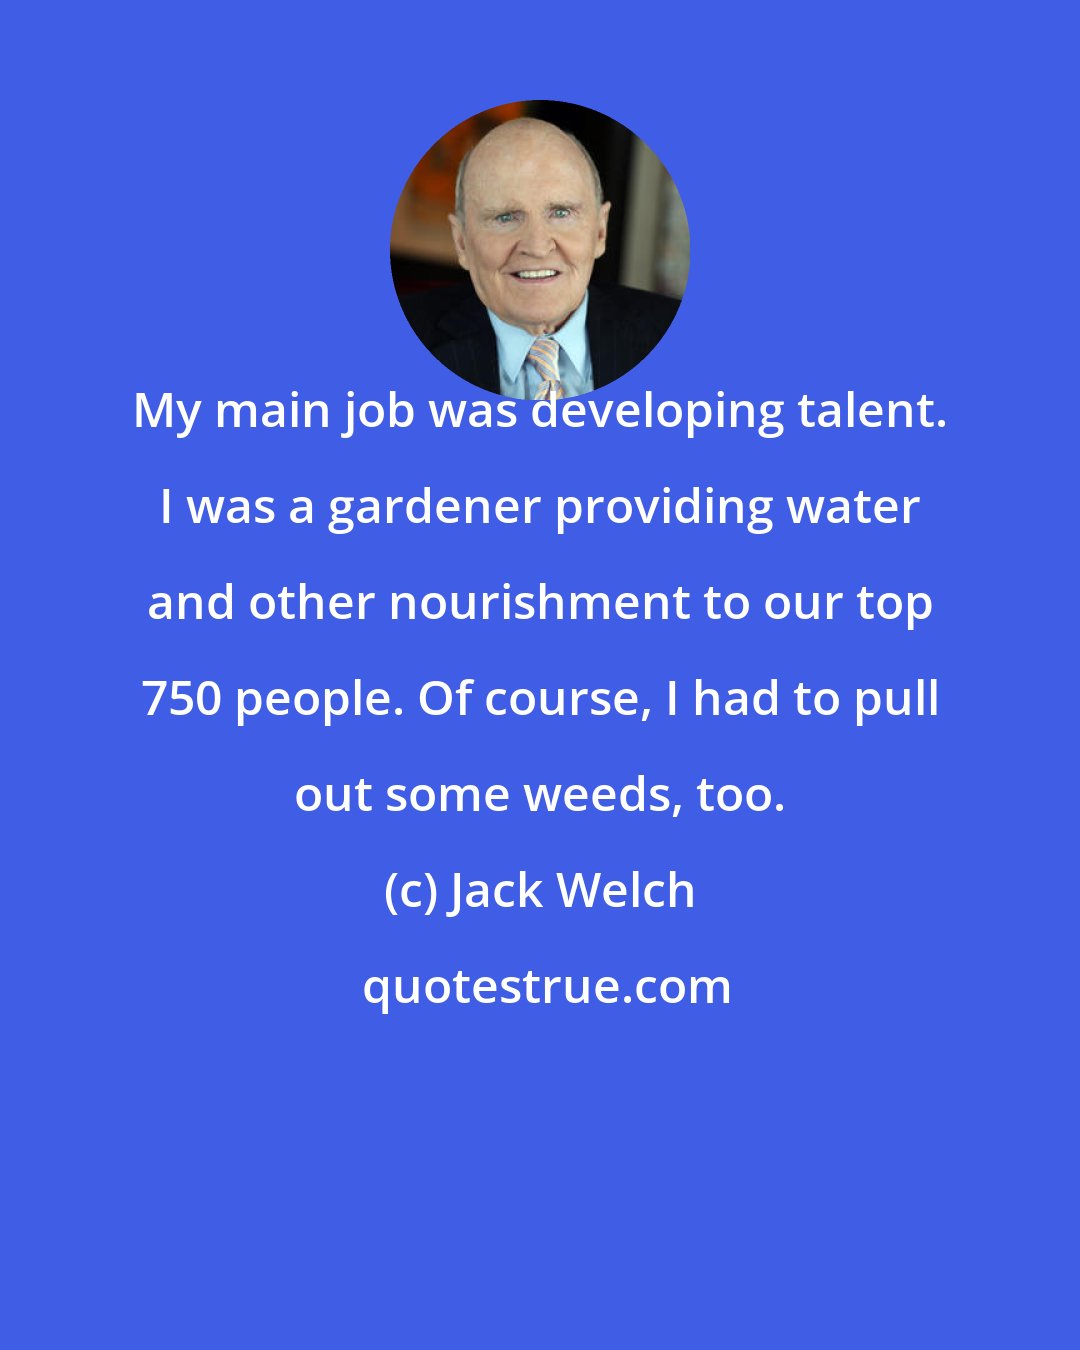 Jack Welch: My main job was developing talent. I was a gardener providing water and other nourishment to our top 750 people. Of course, I had to pull out some weeds, too.